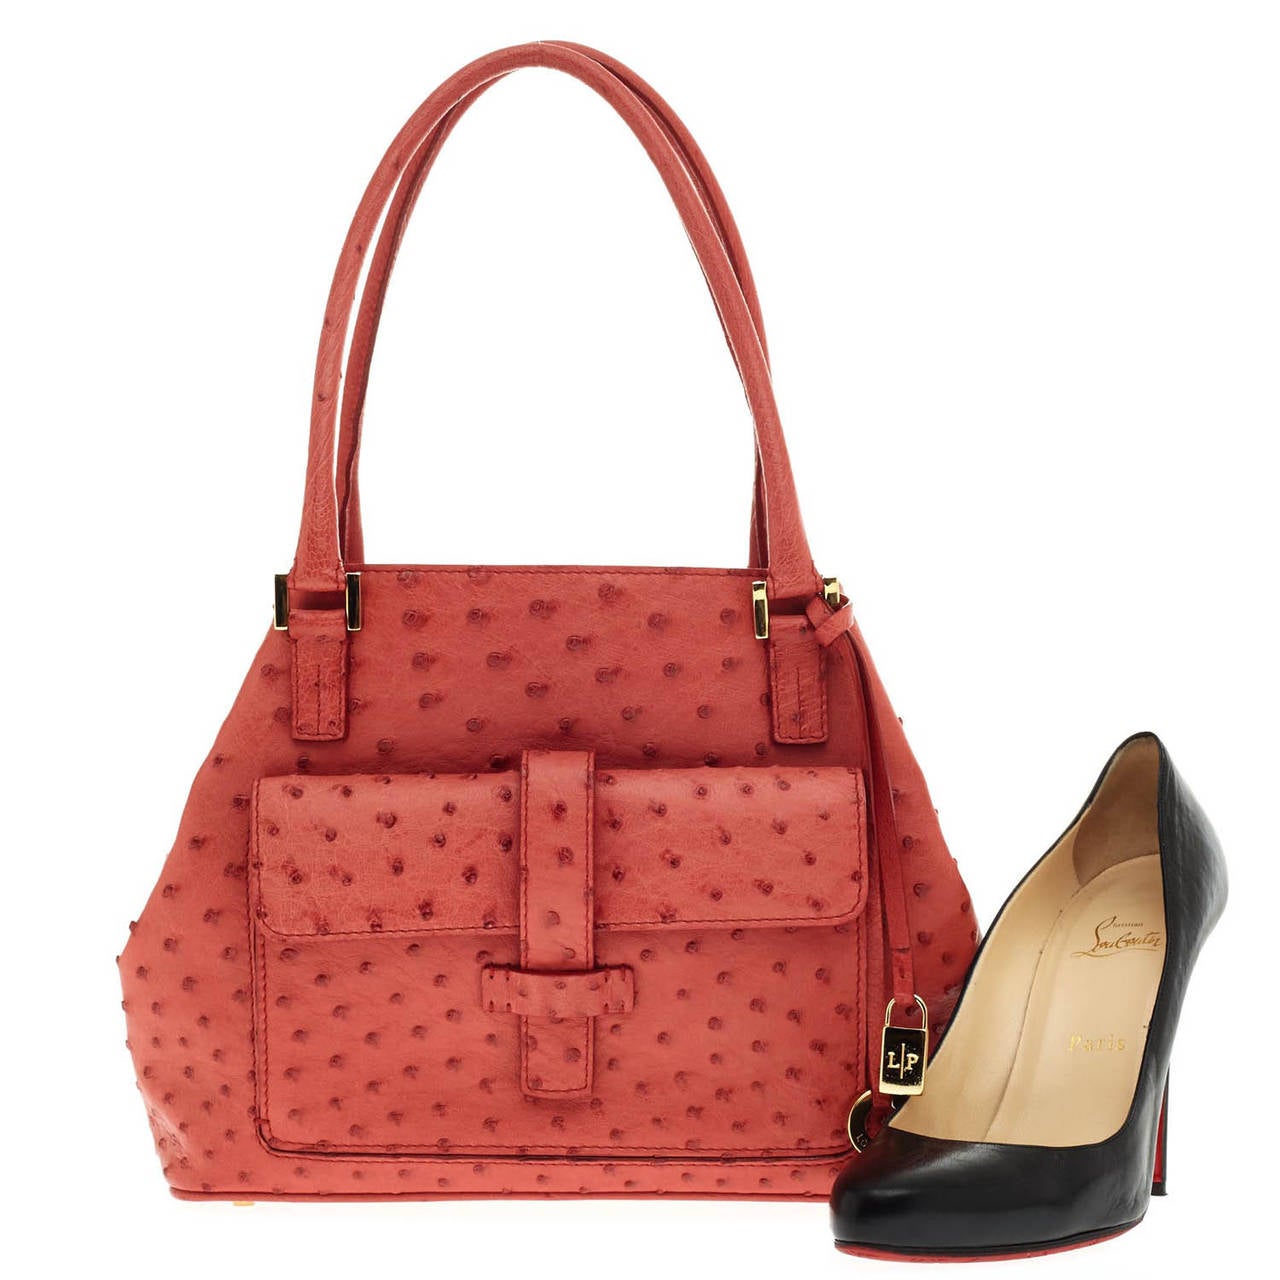 Synonymous with impeccable luxurious Italian quality, this authentic Loro Piana Globe Tote in size Mini in red strawberry color is crafted of fine Ostrich leather and accented with gold-tone hardware. This beautiful bag features multiple pockets on